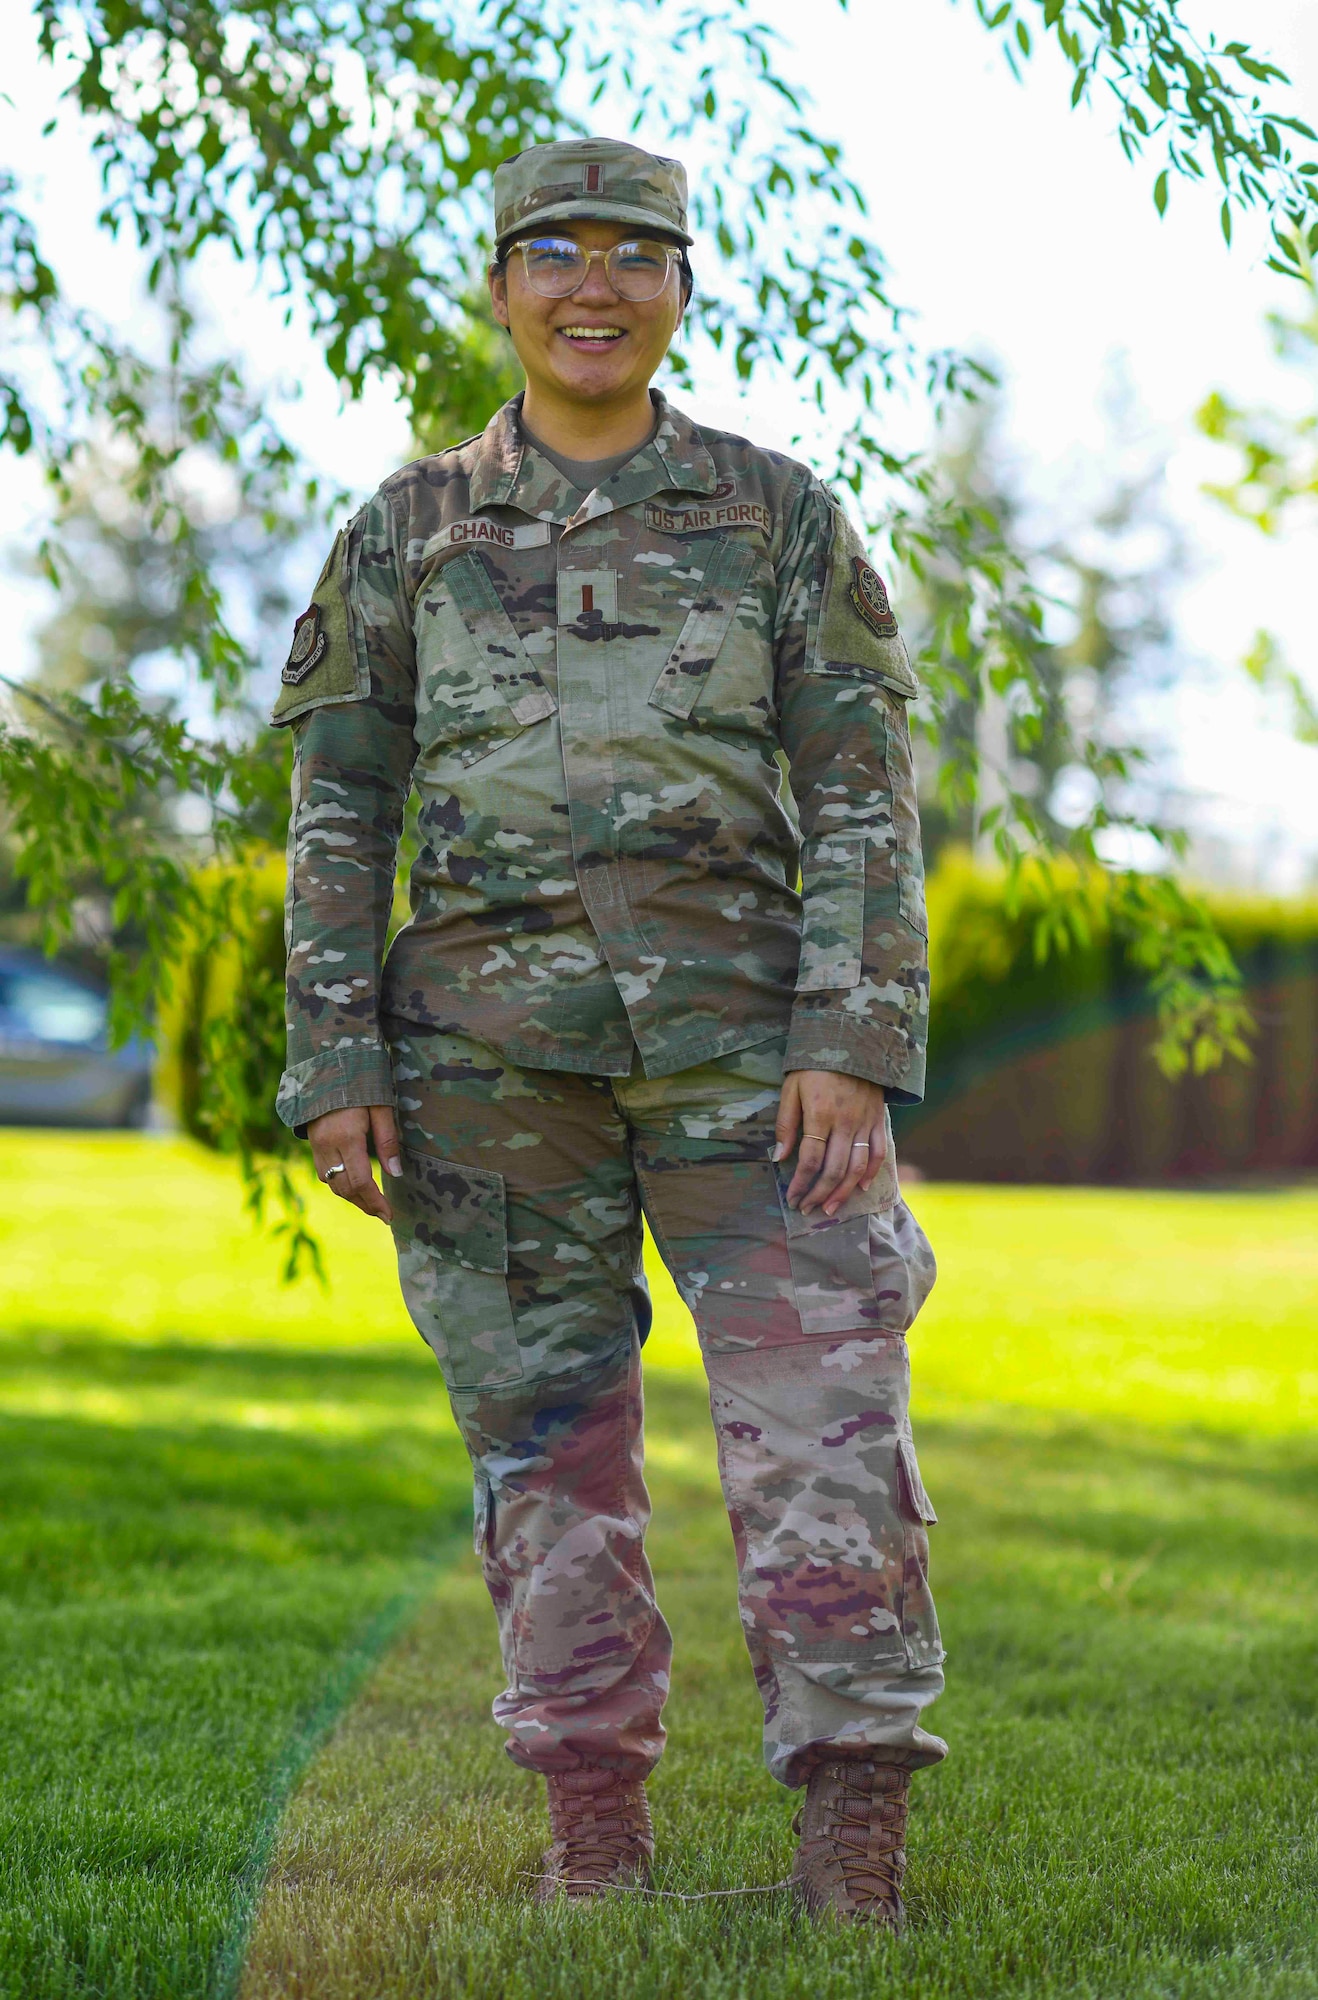 U.S. Air Force 2nd Lt. Michelle Chang, 92nd Air Refueling Wing public affairs command information chief, poses for a photo at Fairchild Air Force Base, Washington, May 26, 2021. Chang is a Korean-American Airman and is one of two children to Korean immigrants. (U.S. Air Force photo by Airman 1st Class Kiaundra Miller)